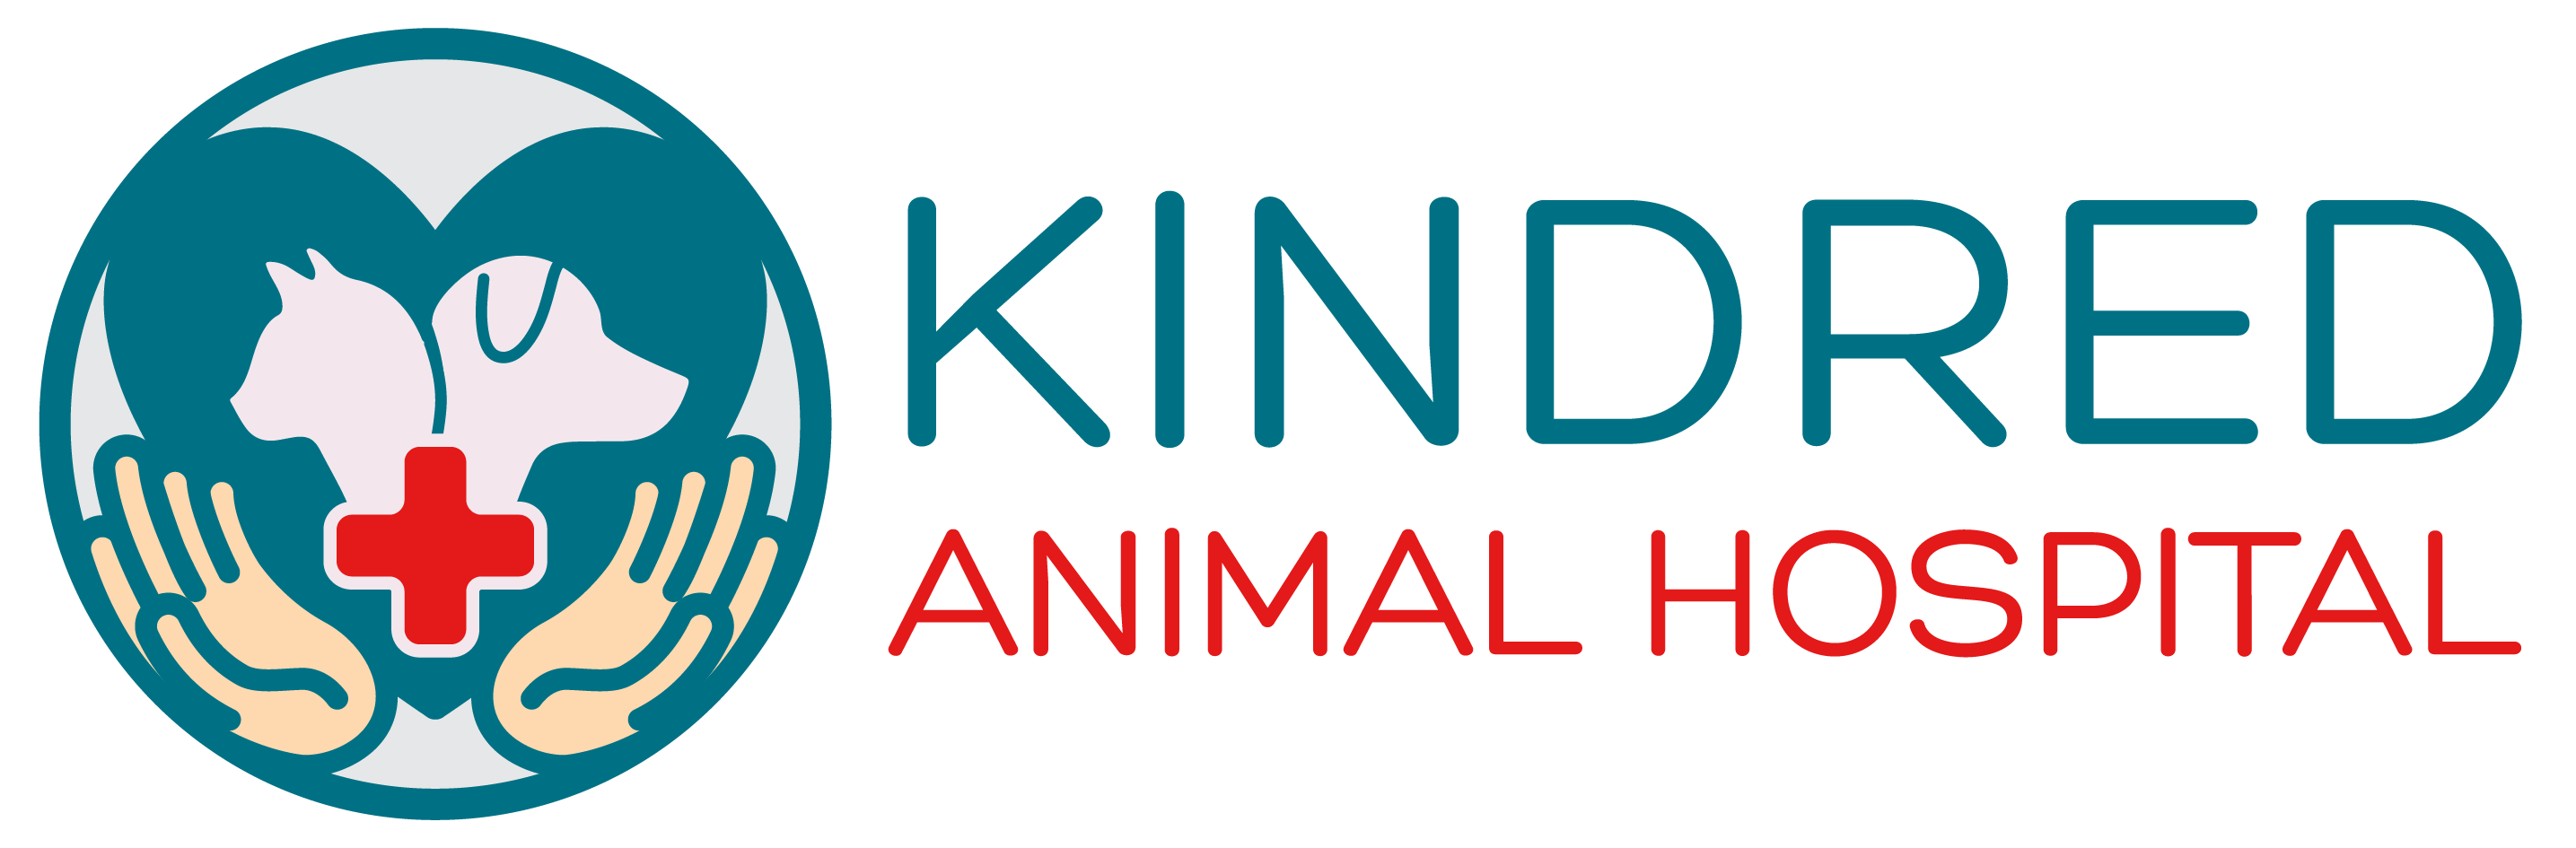 Kindred Animal Hospital - Dr. Heather Bunting - Kyle, TX Veterinarian